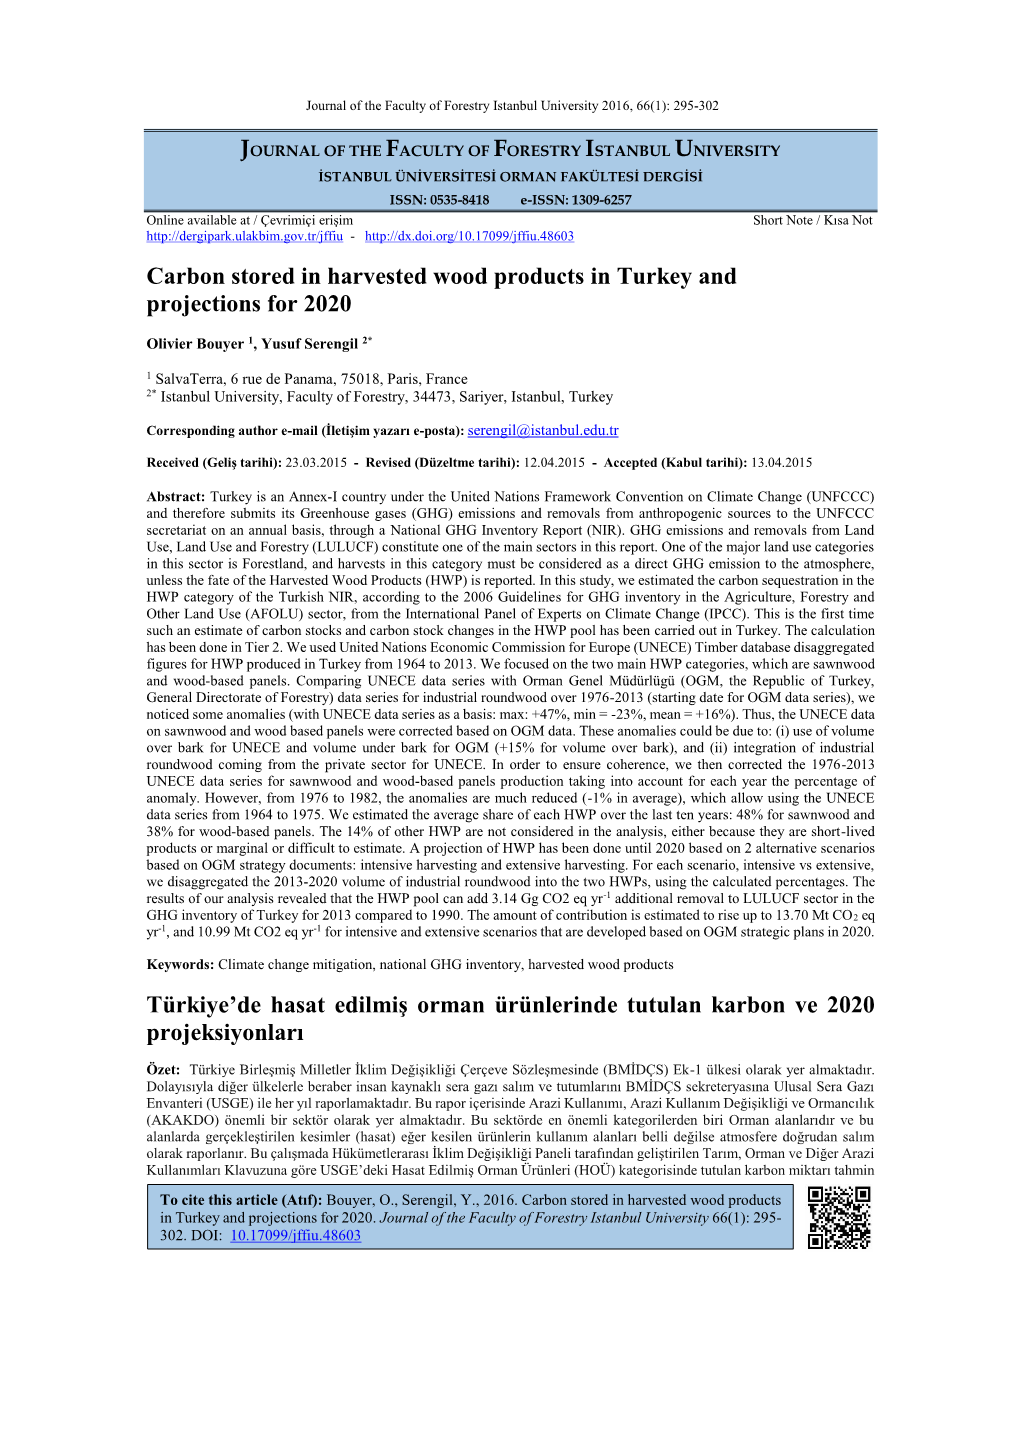 Carbon Stored in Harvested Wood Products in Turkey and Projections for 2020